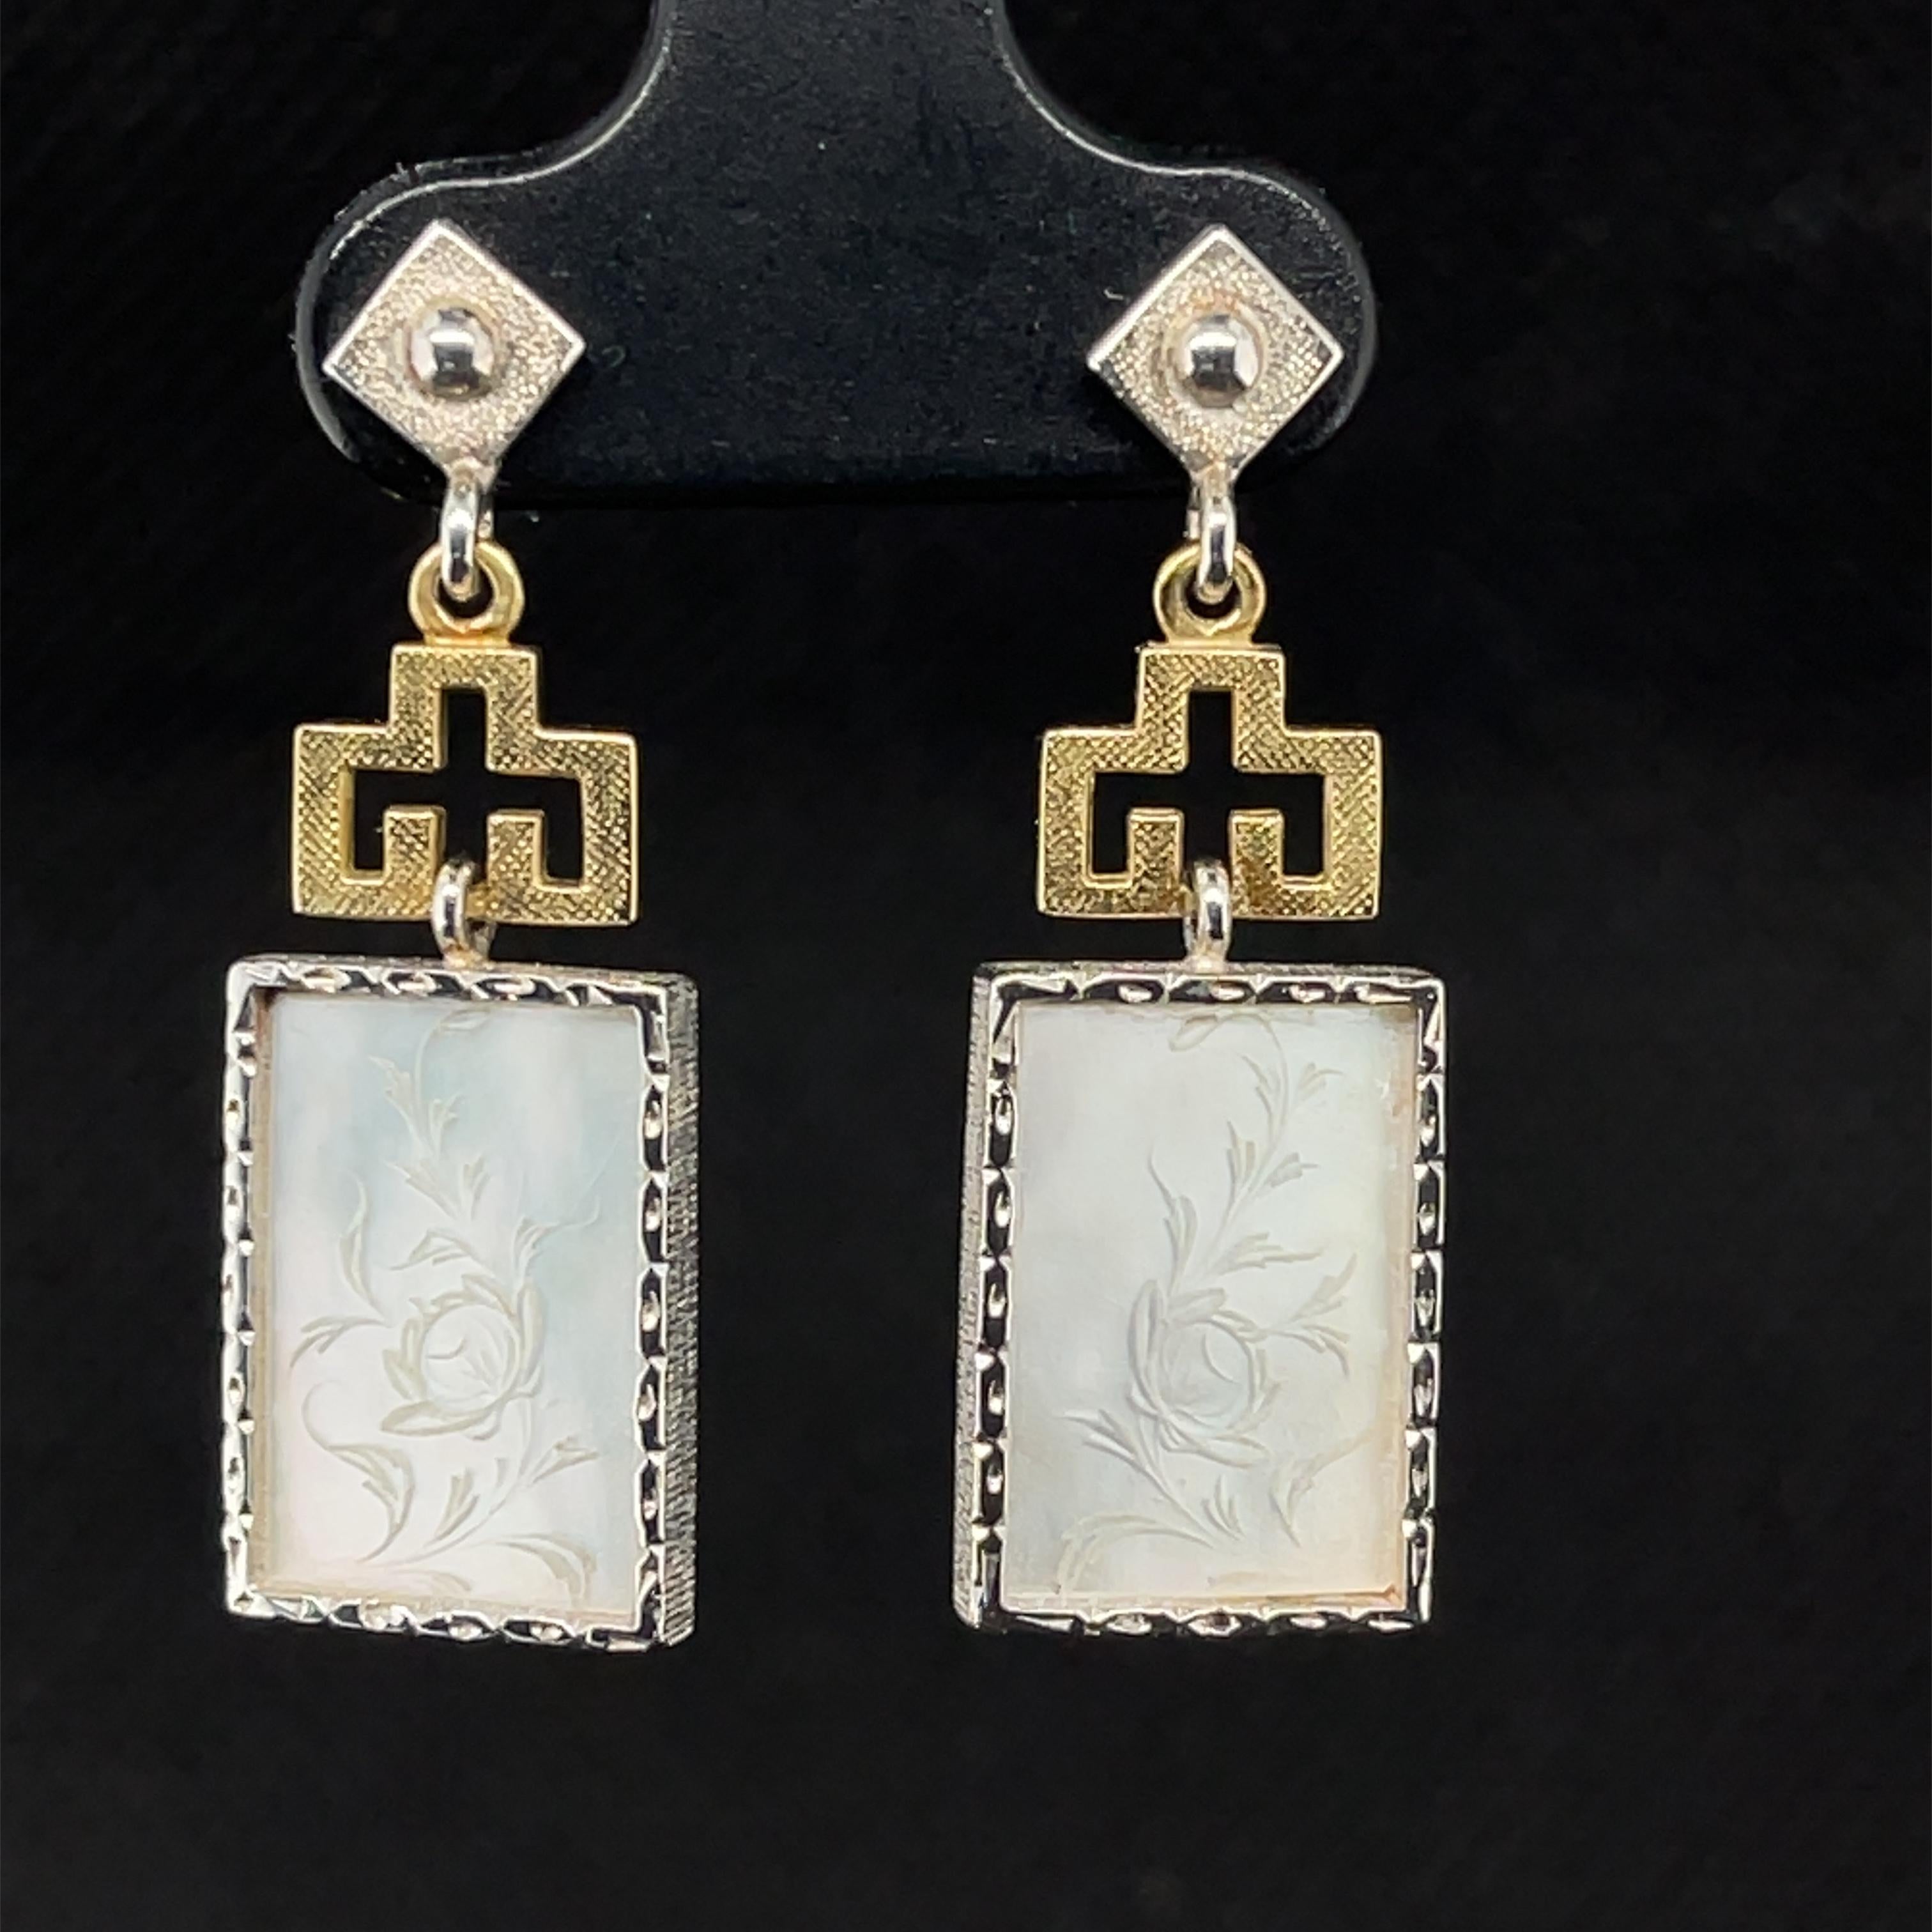 These beautiful earrings feature antique, mother-of-pearl Chinese gambling counters with motifs dating back to the 18th Century. Originally carved in China for export to Britain, these gaming counters were used like we would use poker chips. Each